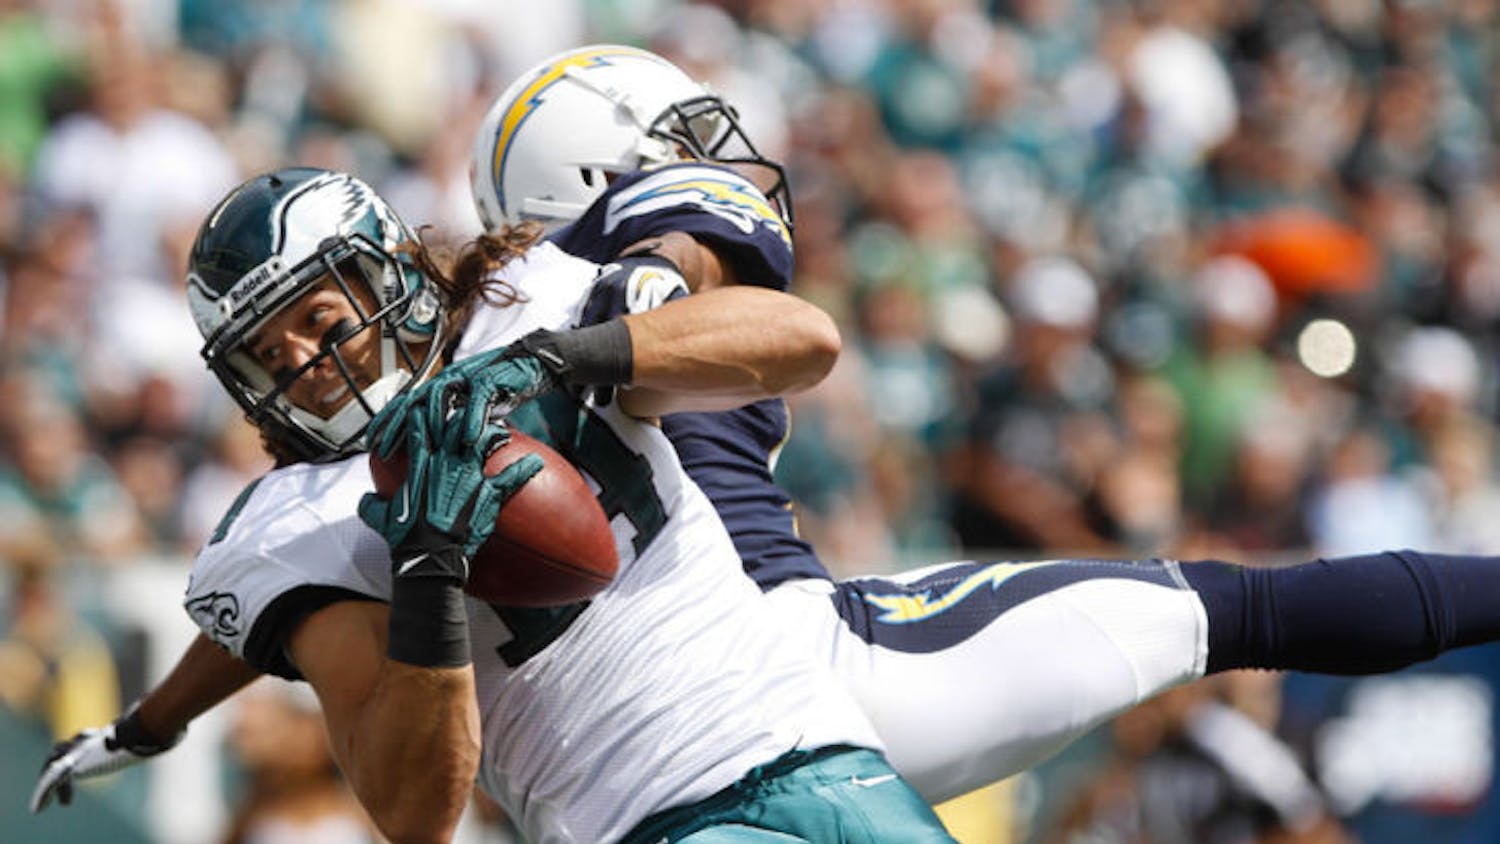 Philadelphia Eagles wide receiver Riley Cooper (14) catches a touchdown pass from quarterback Michael Vick during the second quarter of a 33-30 loss to the San Diego Chargers on Sunday in Philadelphia. Cooper had two catches for 25 yards in the game.